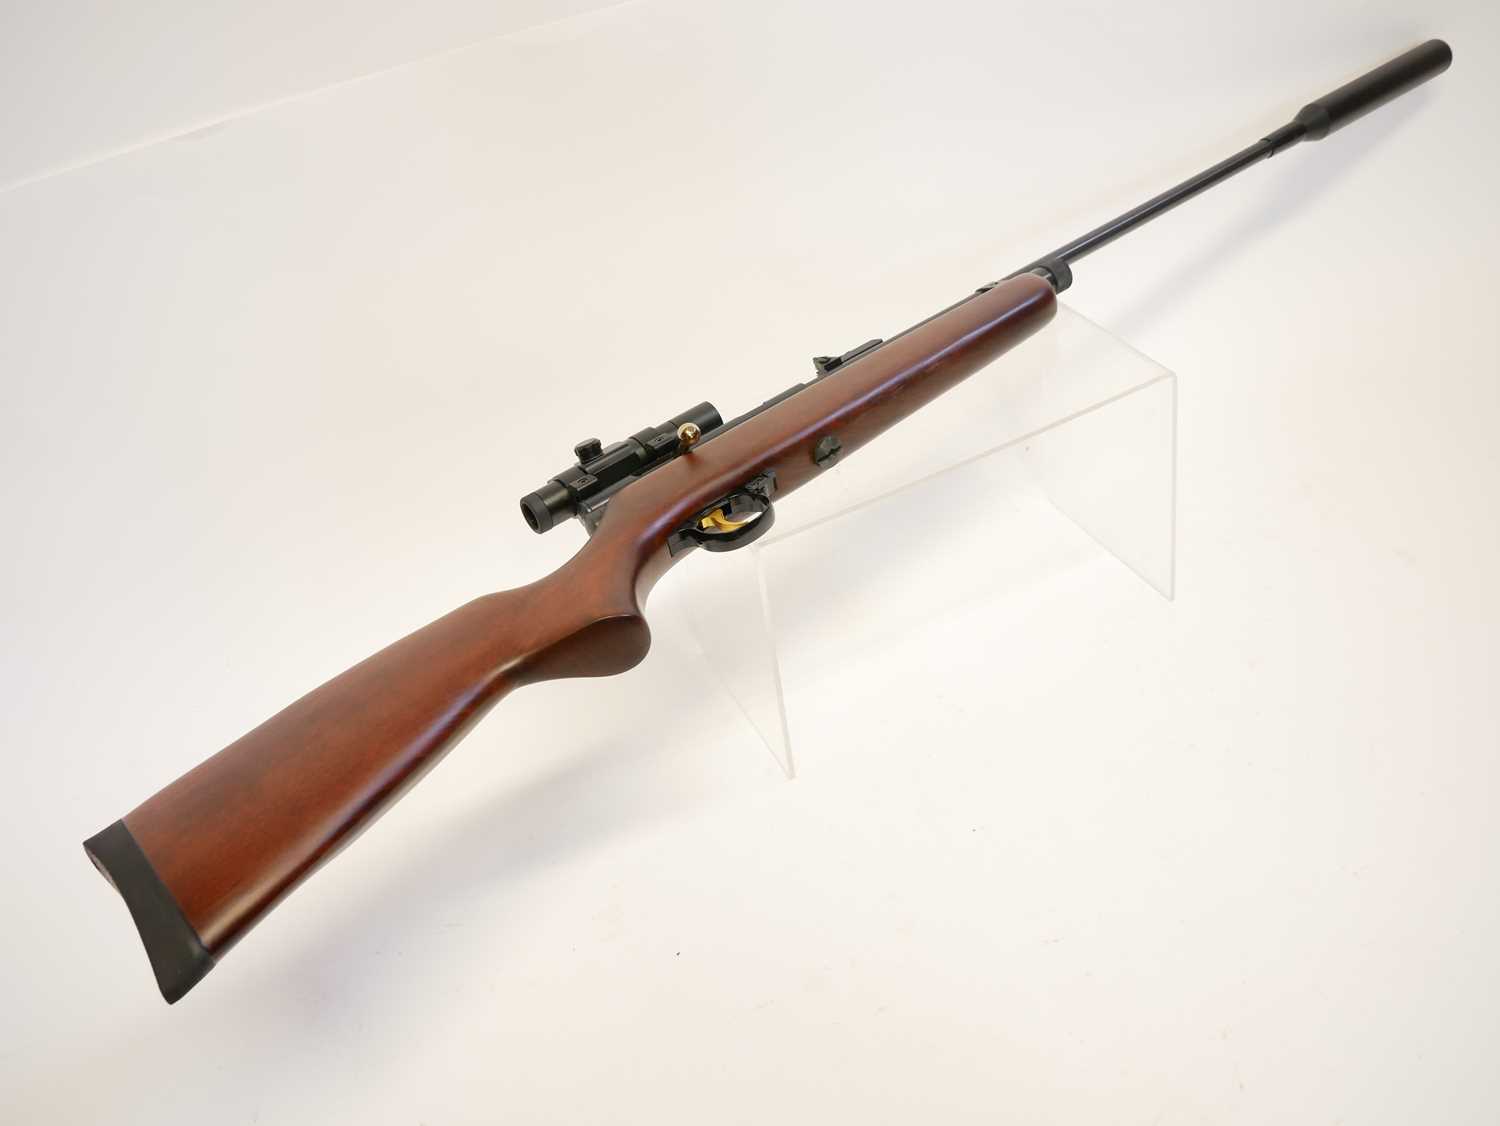 SMK QB78DL .22 CO2 air rifle, 29inch barrel including the fitted moderator, fitted with Hawke scope, - Image 7 of 12